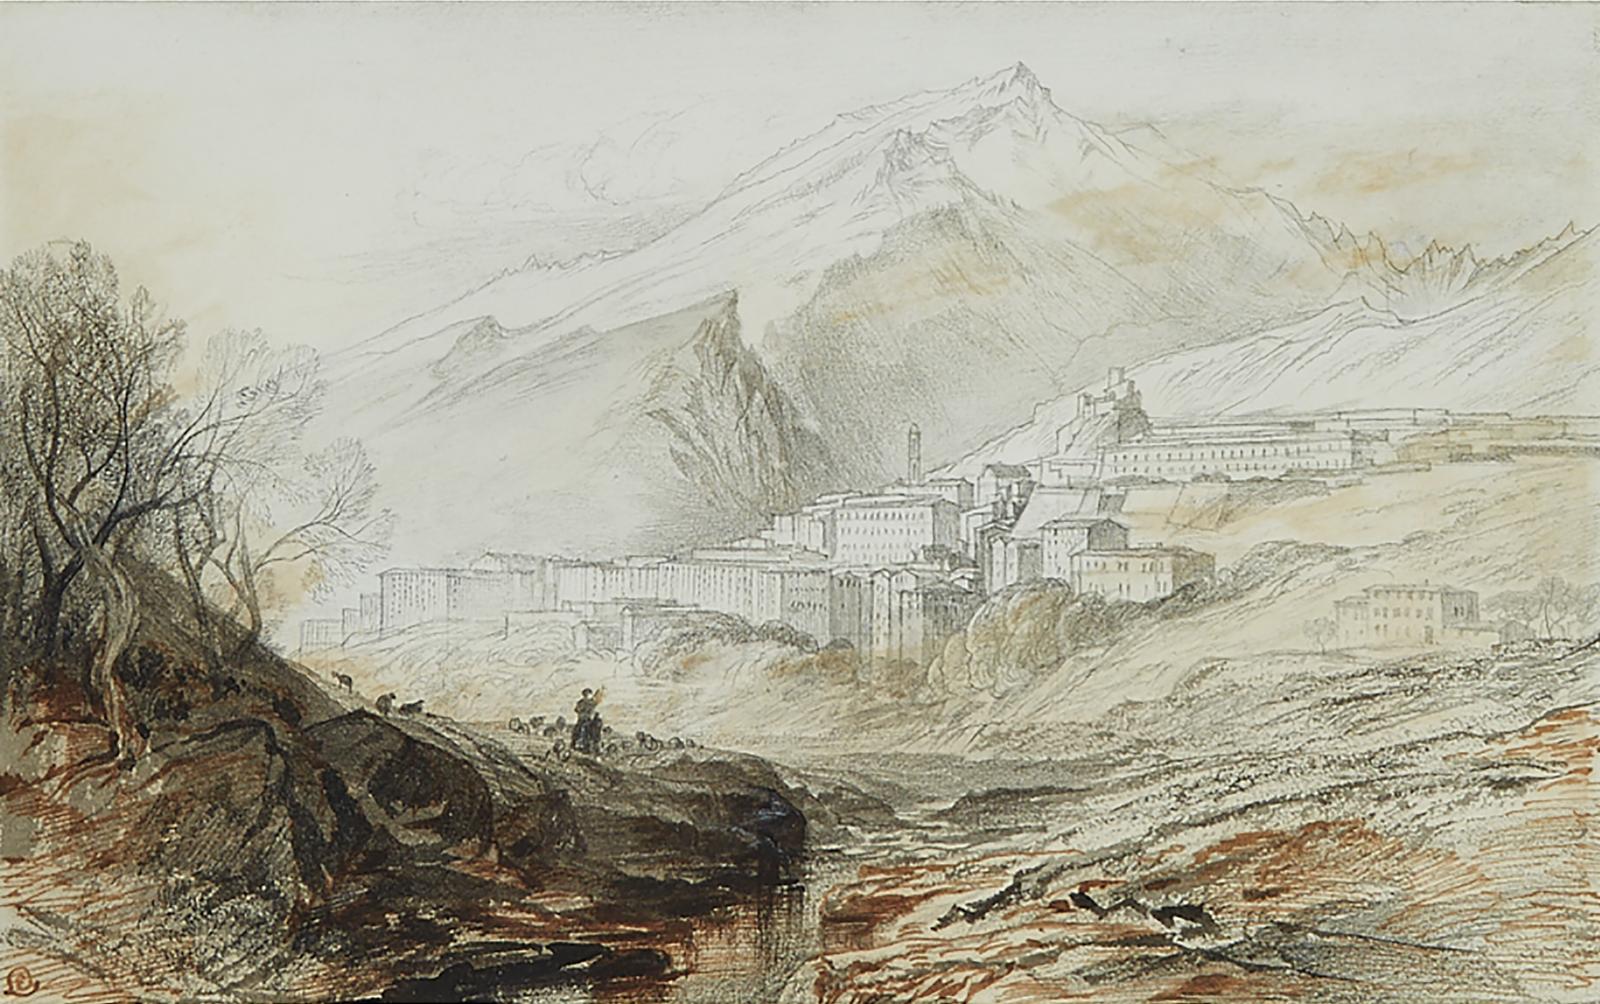 Edward Lear (1812-1888) - A View Of Corte, Corsica From The Road Leading To Bastia, May 19th-21st, 1868